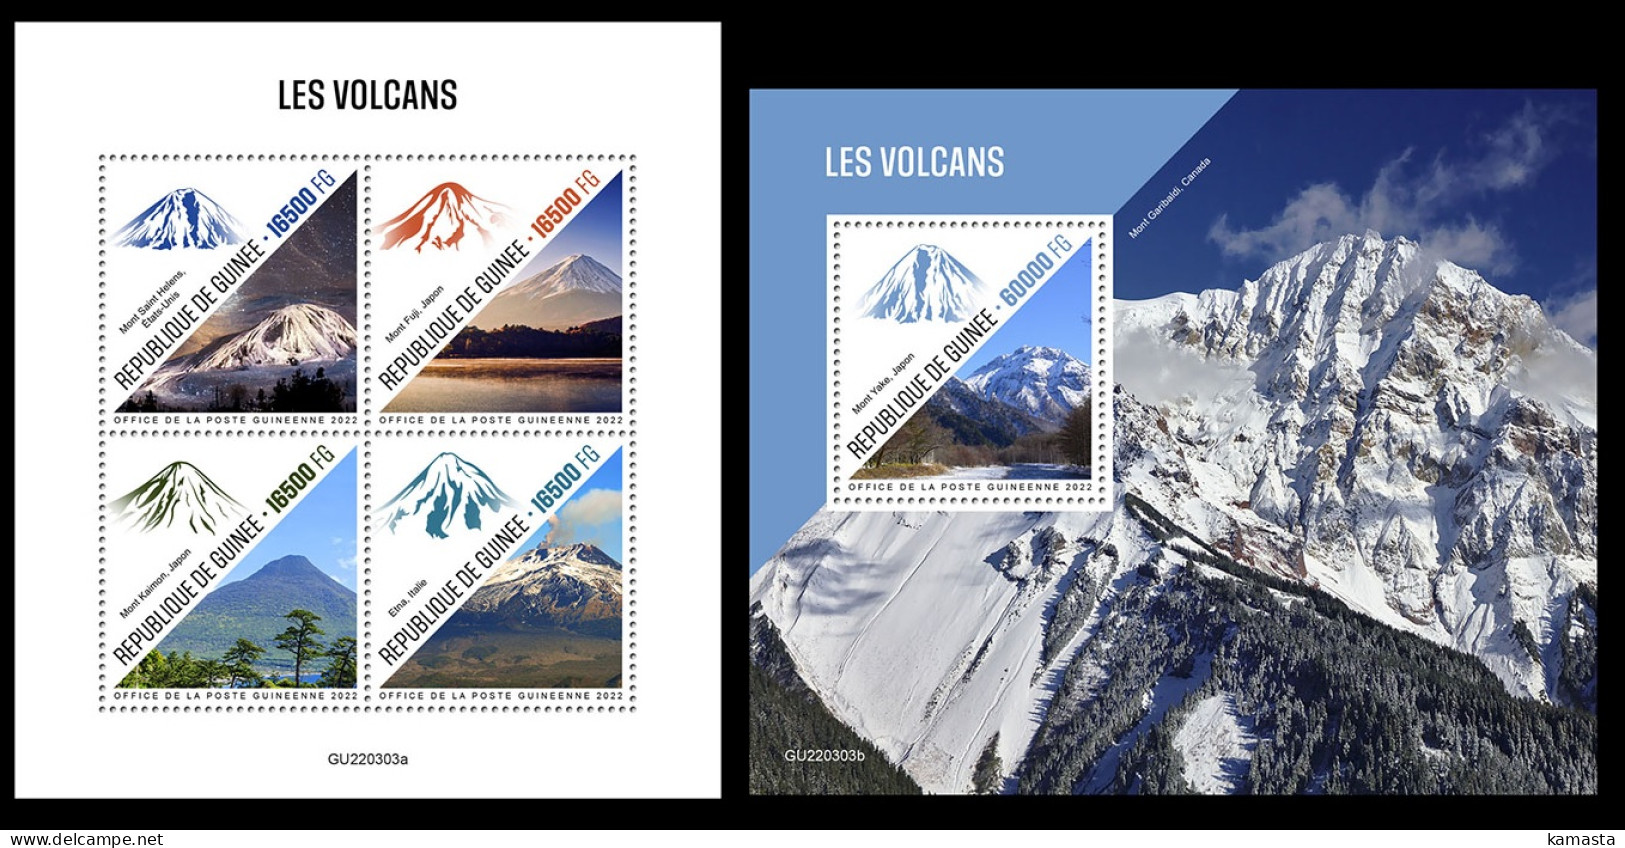 Guinea  2022 Volcanoes. (303) OFFICIAL ISSUE - Volcanes